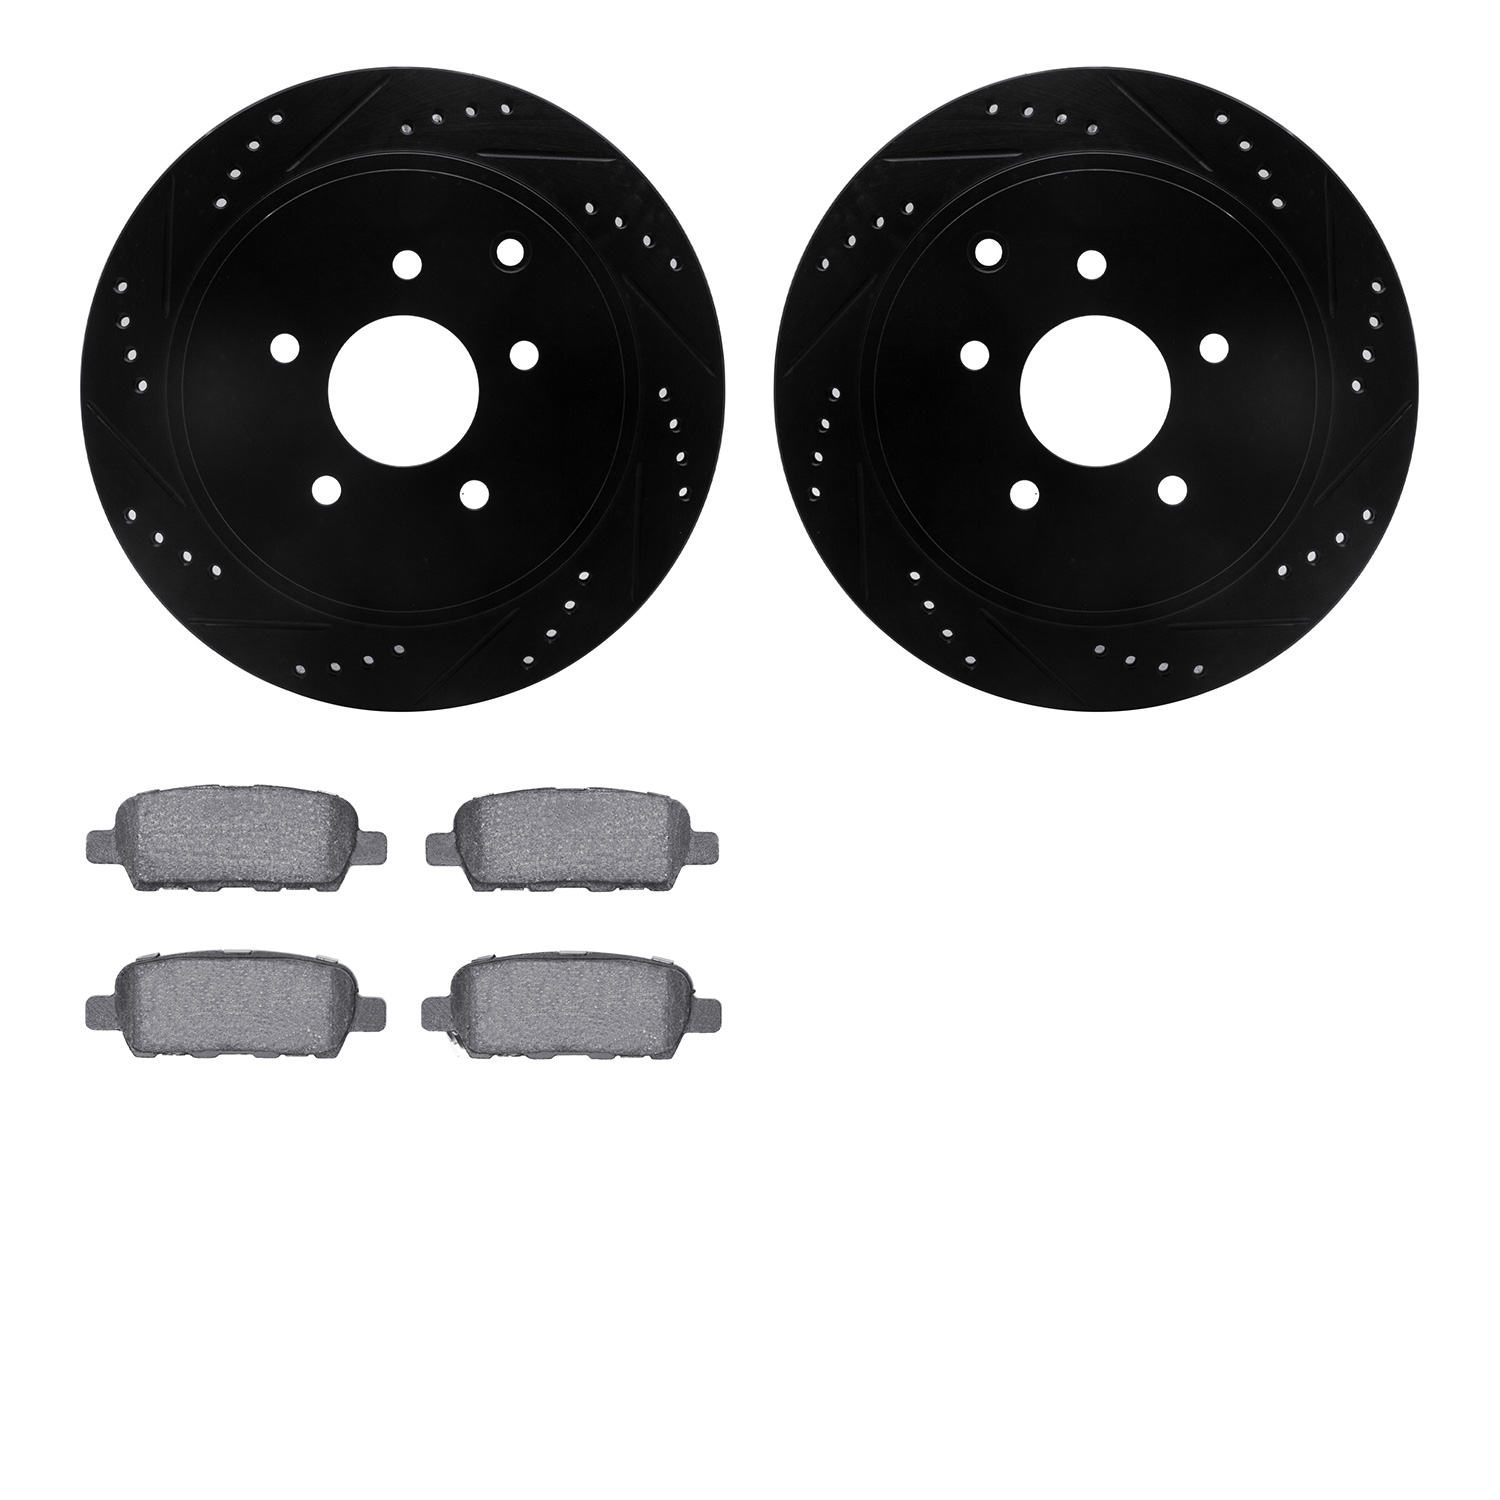 8302-67102 Drilled/Slotted Brake Rotors with 3000-Series Ceramic Brake Pads Kit [Black], Fits Select Infiniti/Nissan, Position: